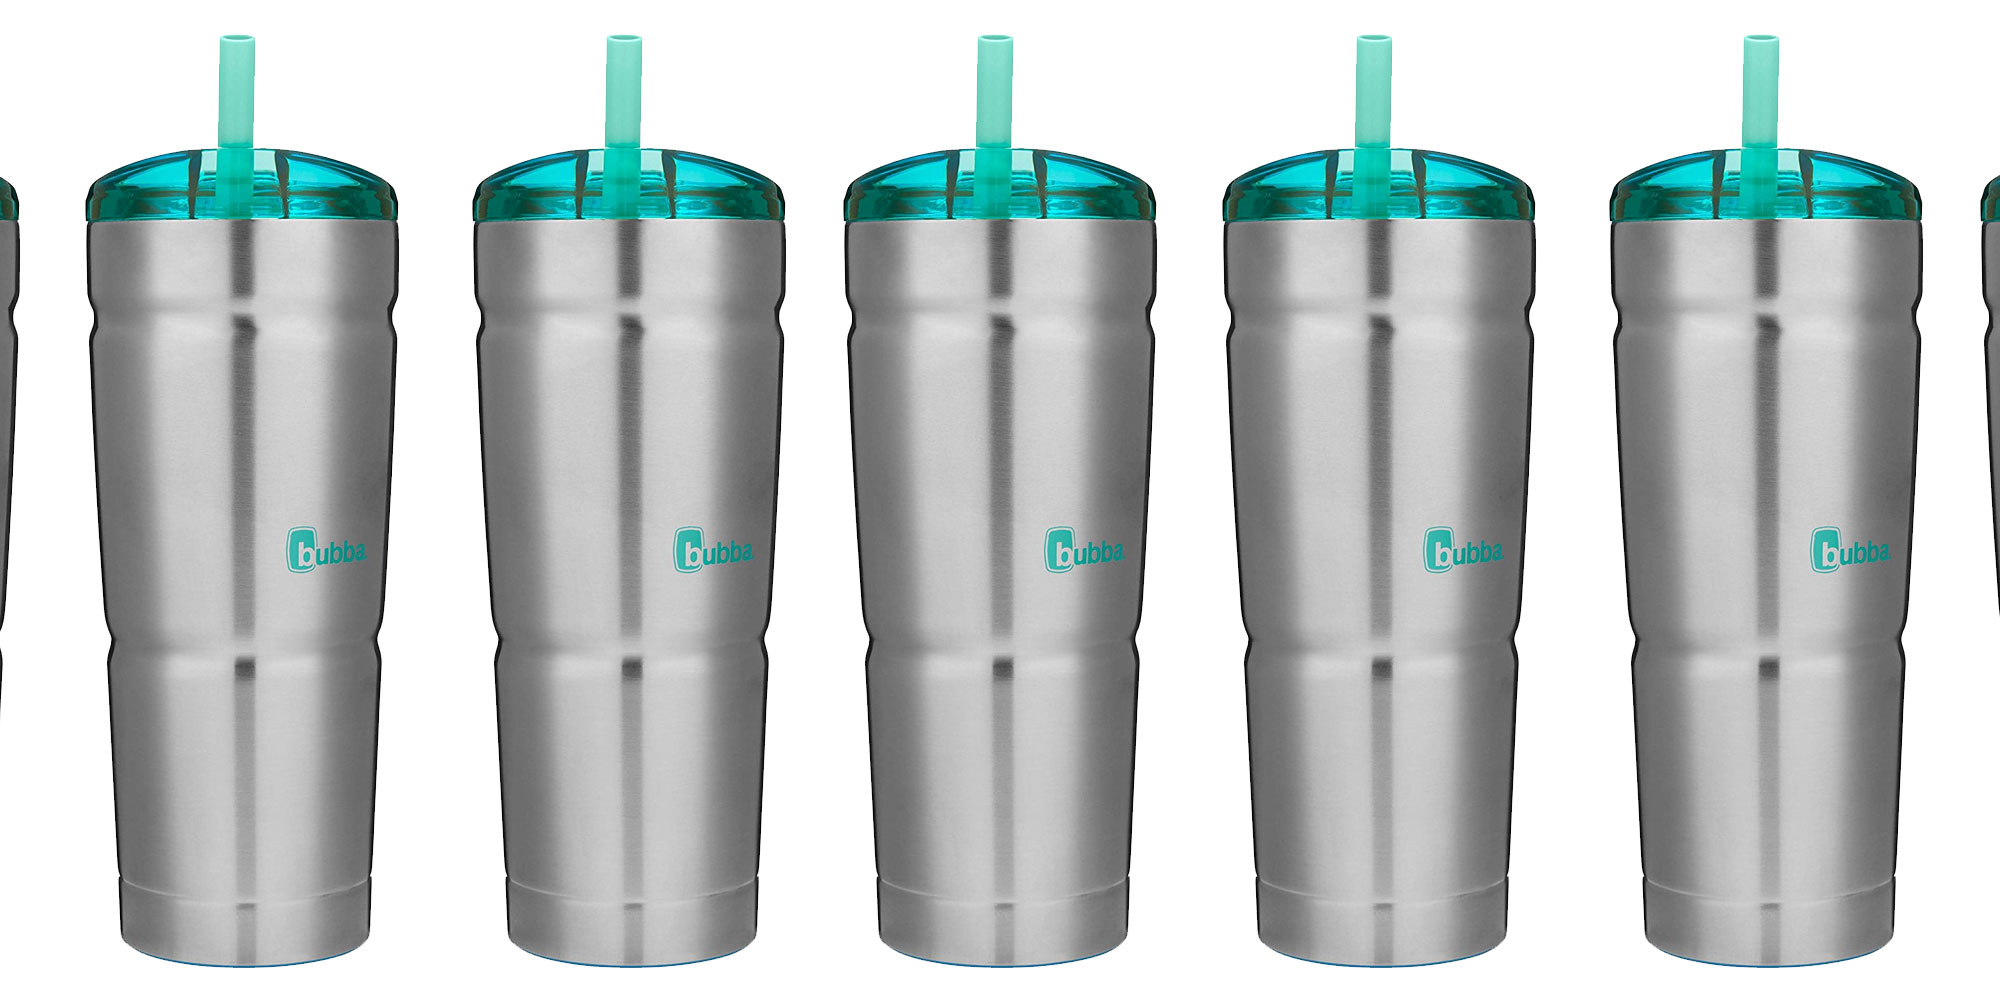 Bubba Envy Insulated Stainless Steel Tumbler with Straw: A Budget